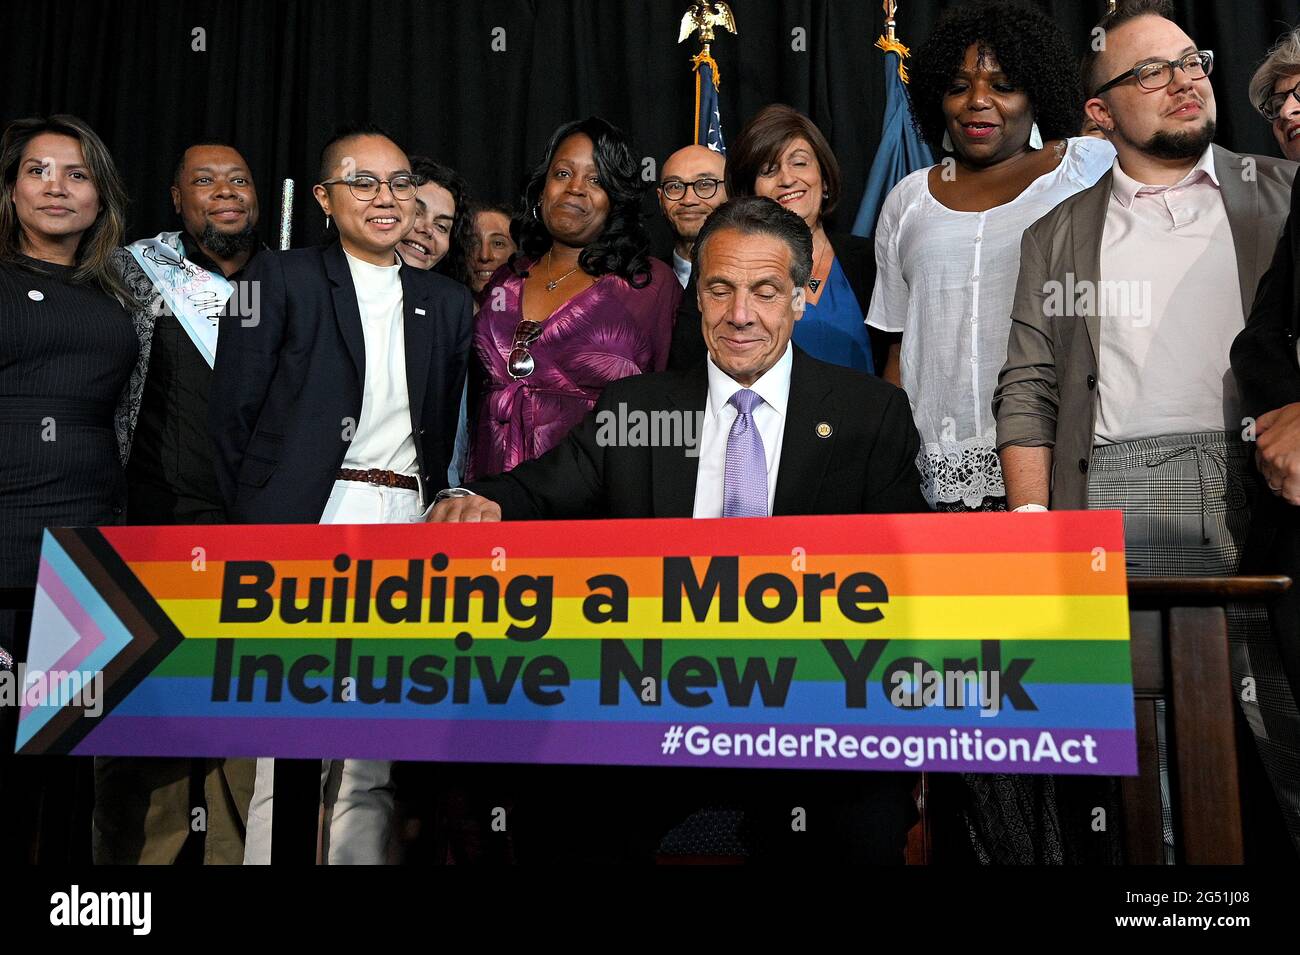 New York, USA. 24th June, 2021. New York Gov. Andrew Cuomo (seated) signs the Gender Recognition Act on the 10th anniversary of the Marriage Equality Act, in honor of Pride Week, at Pier 59 in New York, NY, June 24, 2021. The Gender Recognition Act extends protections for transgender and non-binary New Yorker, allowing people to change their gender on their birth certificates to conform to how they identify themselves. (Photo by Anthony Behar/Sipa USA) Credit: Sipa USA/Alamy Live News Stock Photo